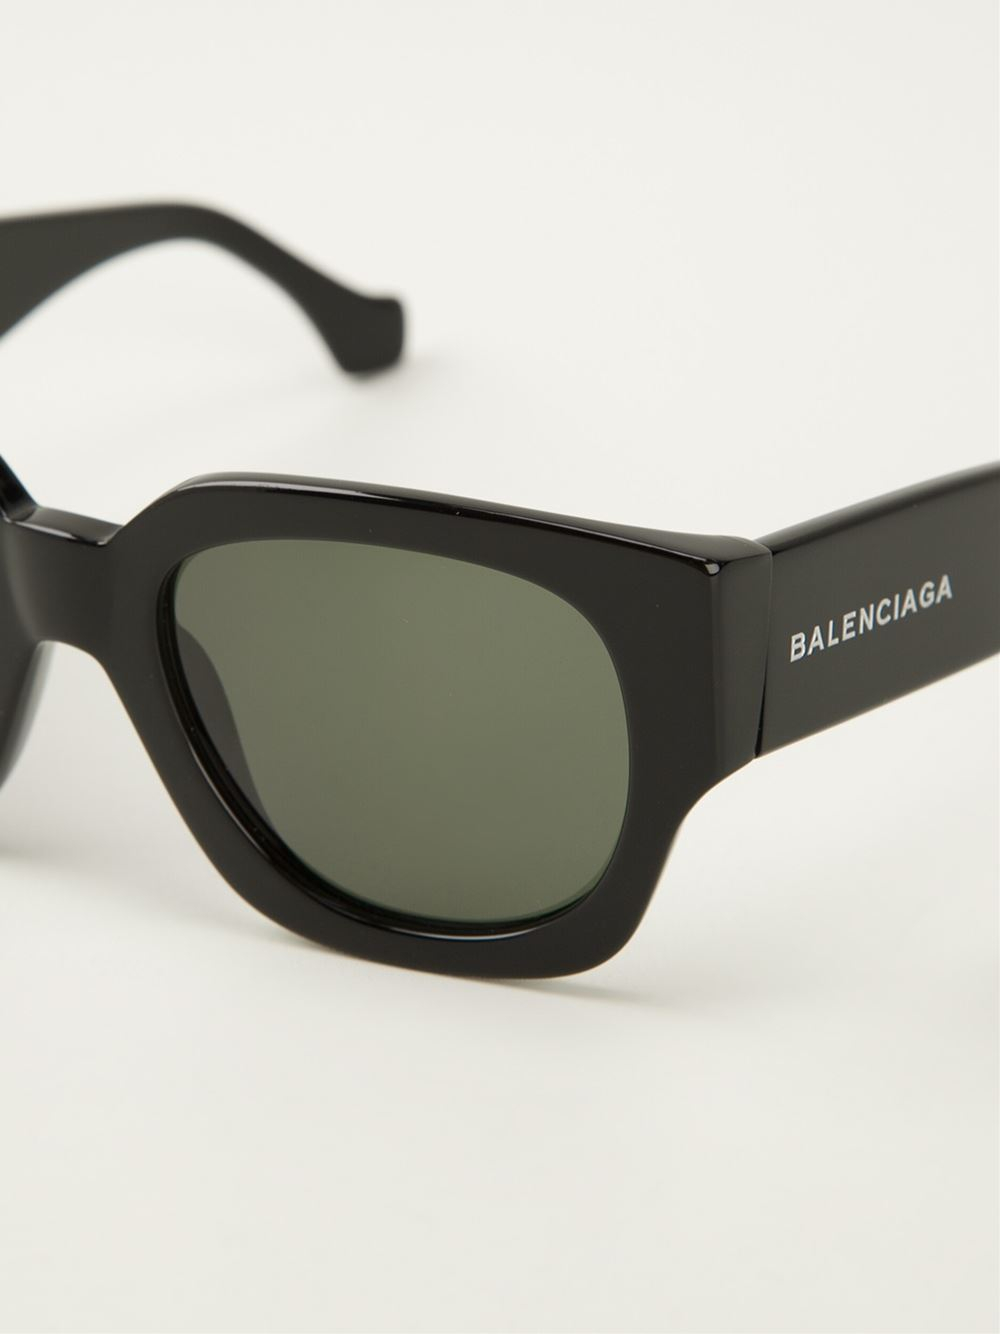 Balenciaga Thick D-Frame Sunglasses in Black for Men - Lyst